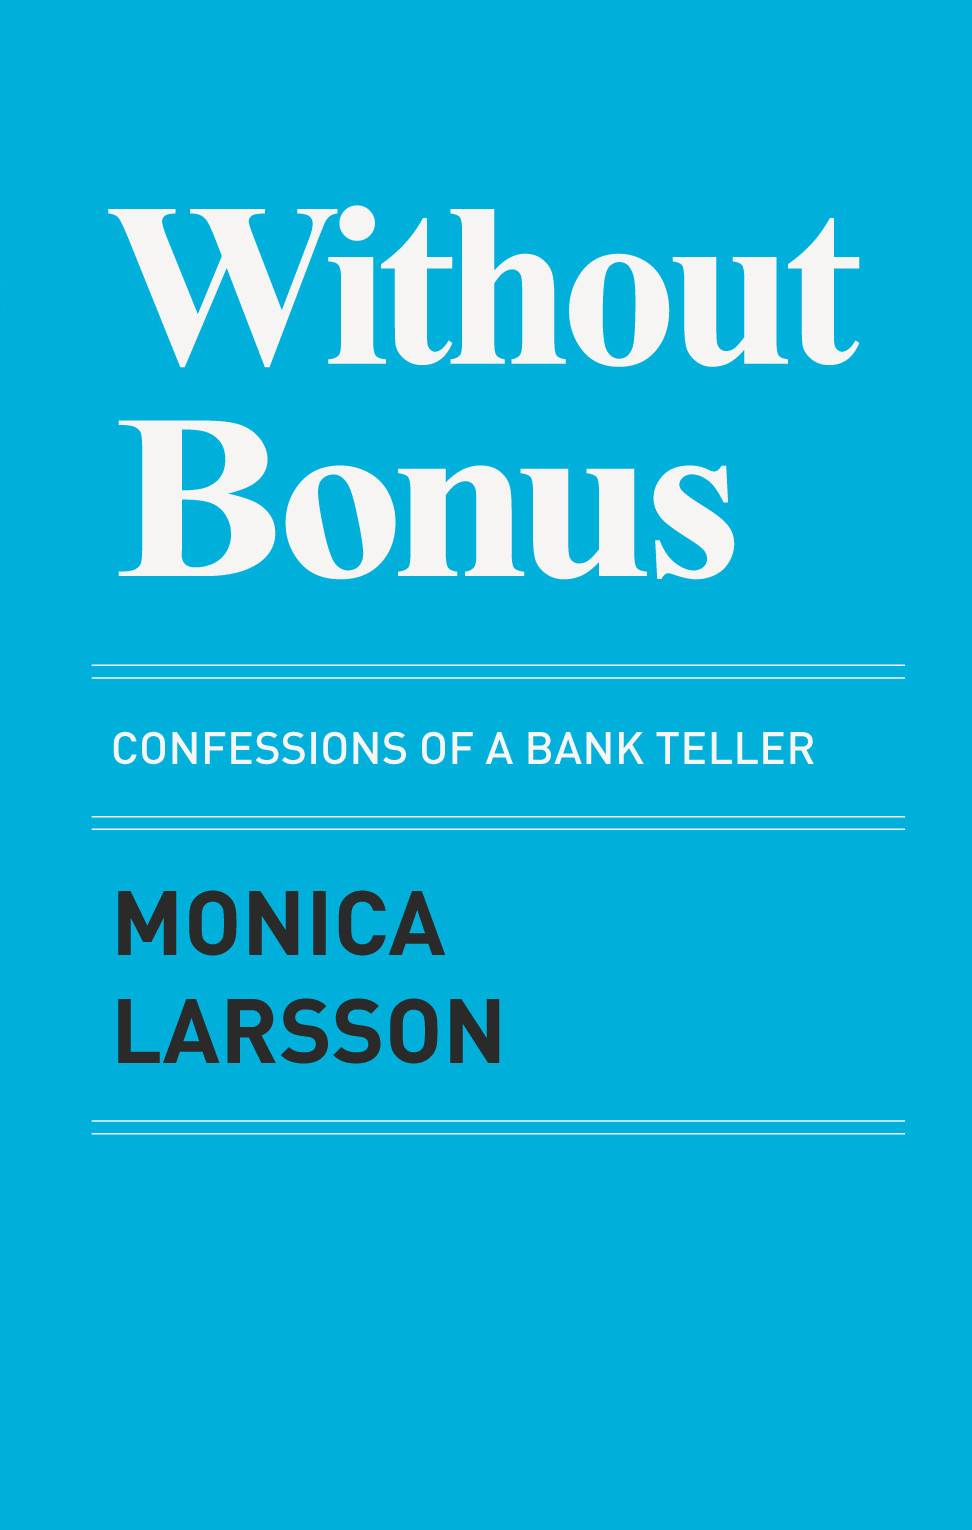 Without Bonus - confessions of a bank teller